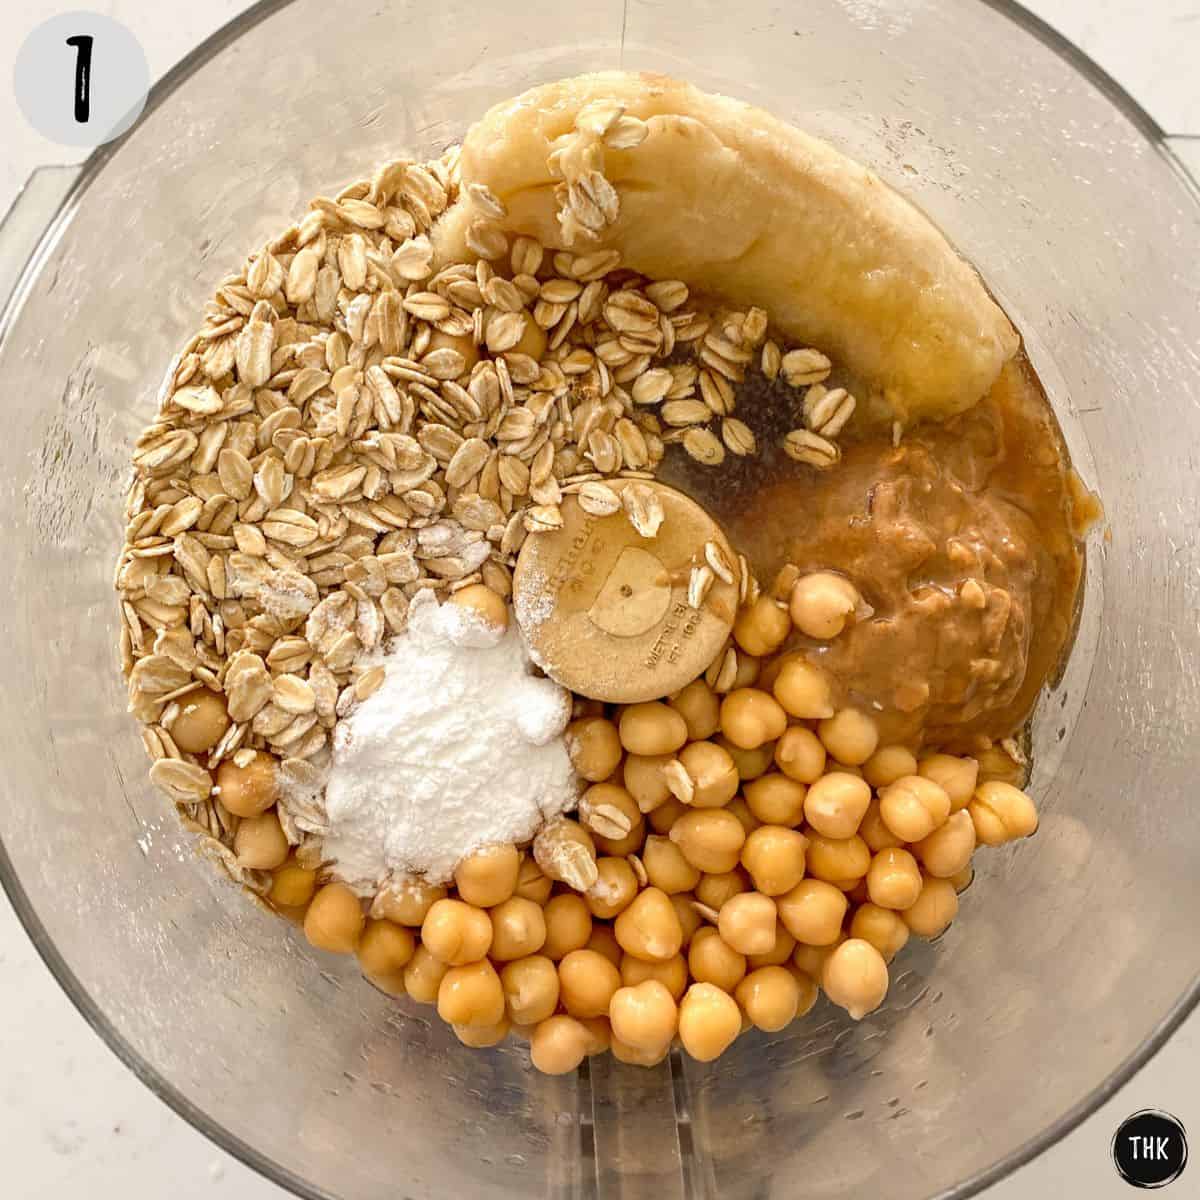 Chickpeas, oats, banana, and peanut butter in food processor.